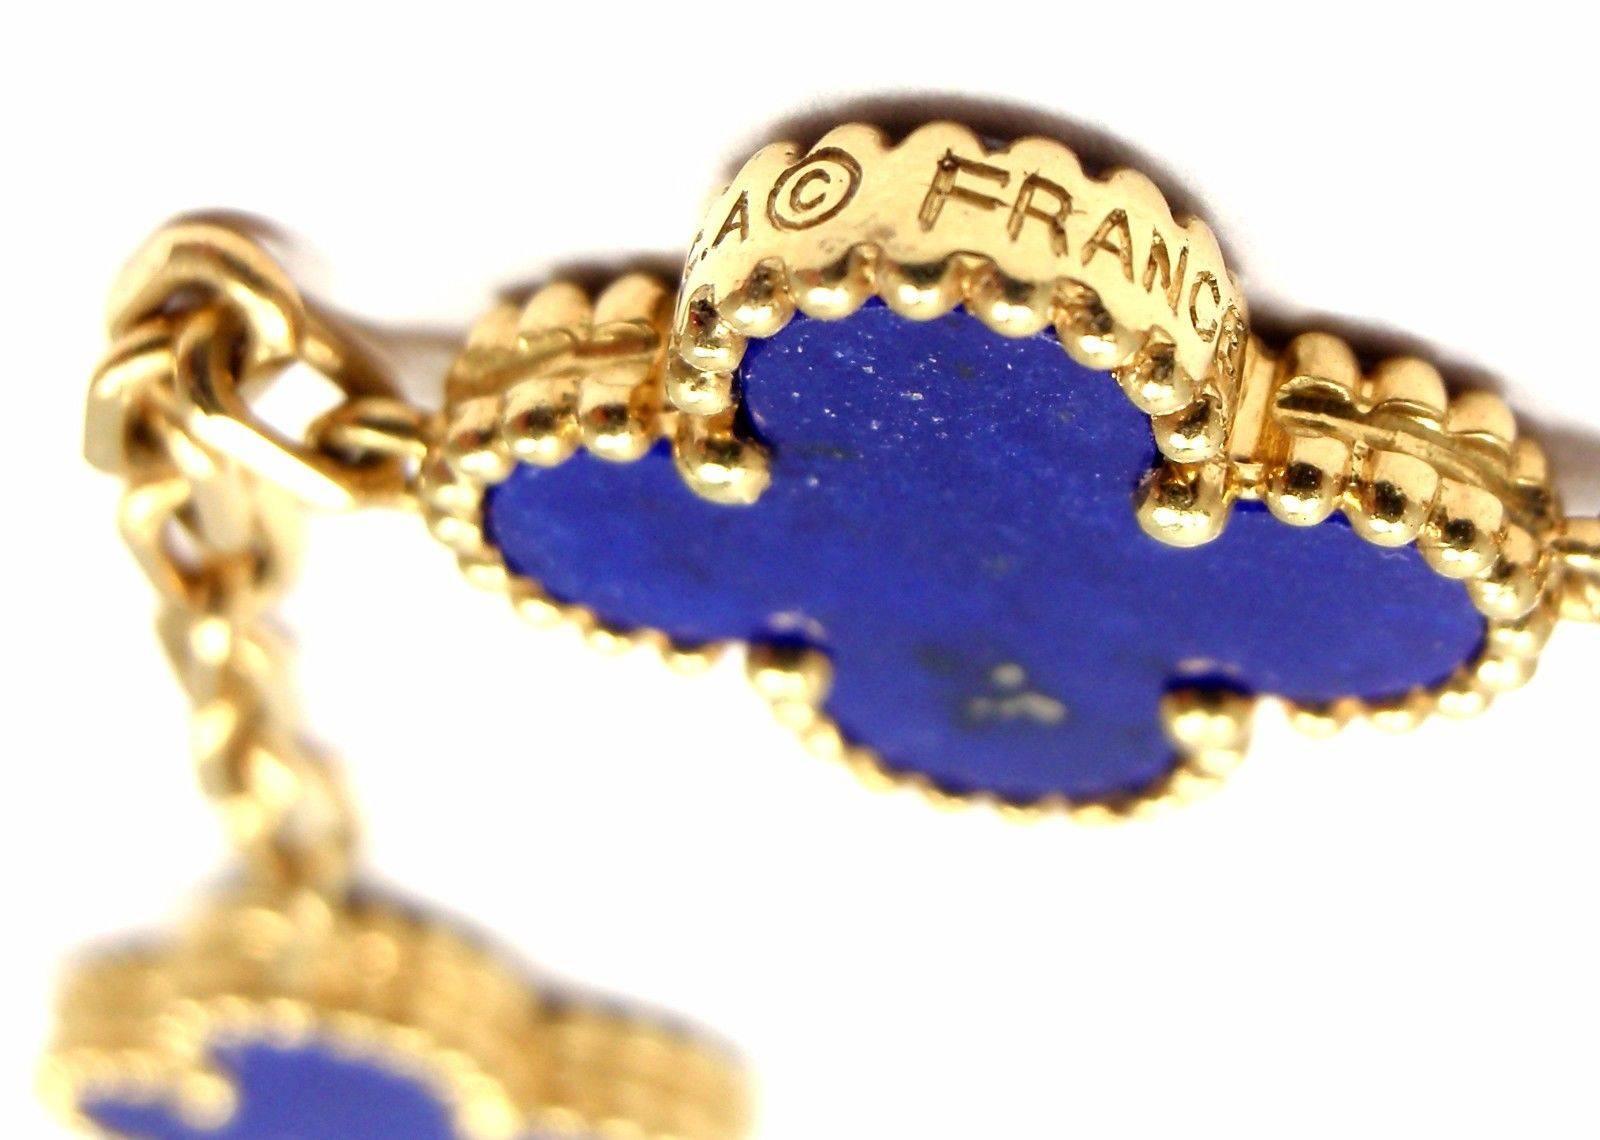 18k Yellow Gold Vintage Alhambra Lapis Lazuli Necklace by 
Van Cleef & Arpels.
With 20 motifs of lapis lazuli alhambra stones 15mm each
*** This is an extremely rare, highly collectible lapis lazuli alhambra necklace by Van Cleef